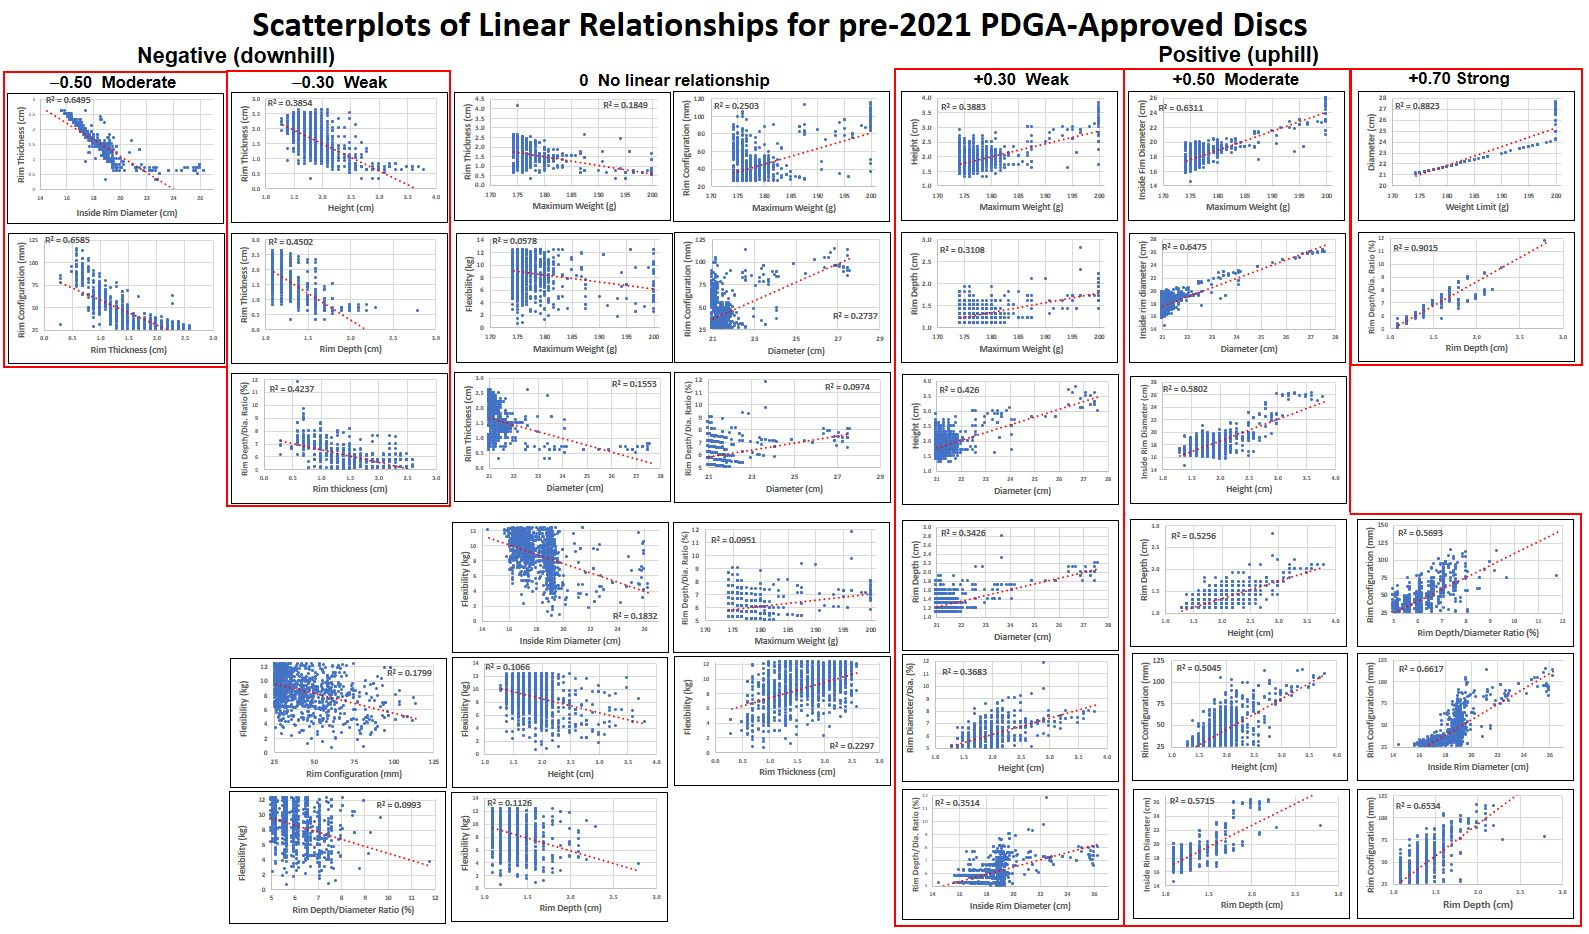 Scatterplots of Linear Relationships for pre-2021 PDGA-Approved Discs